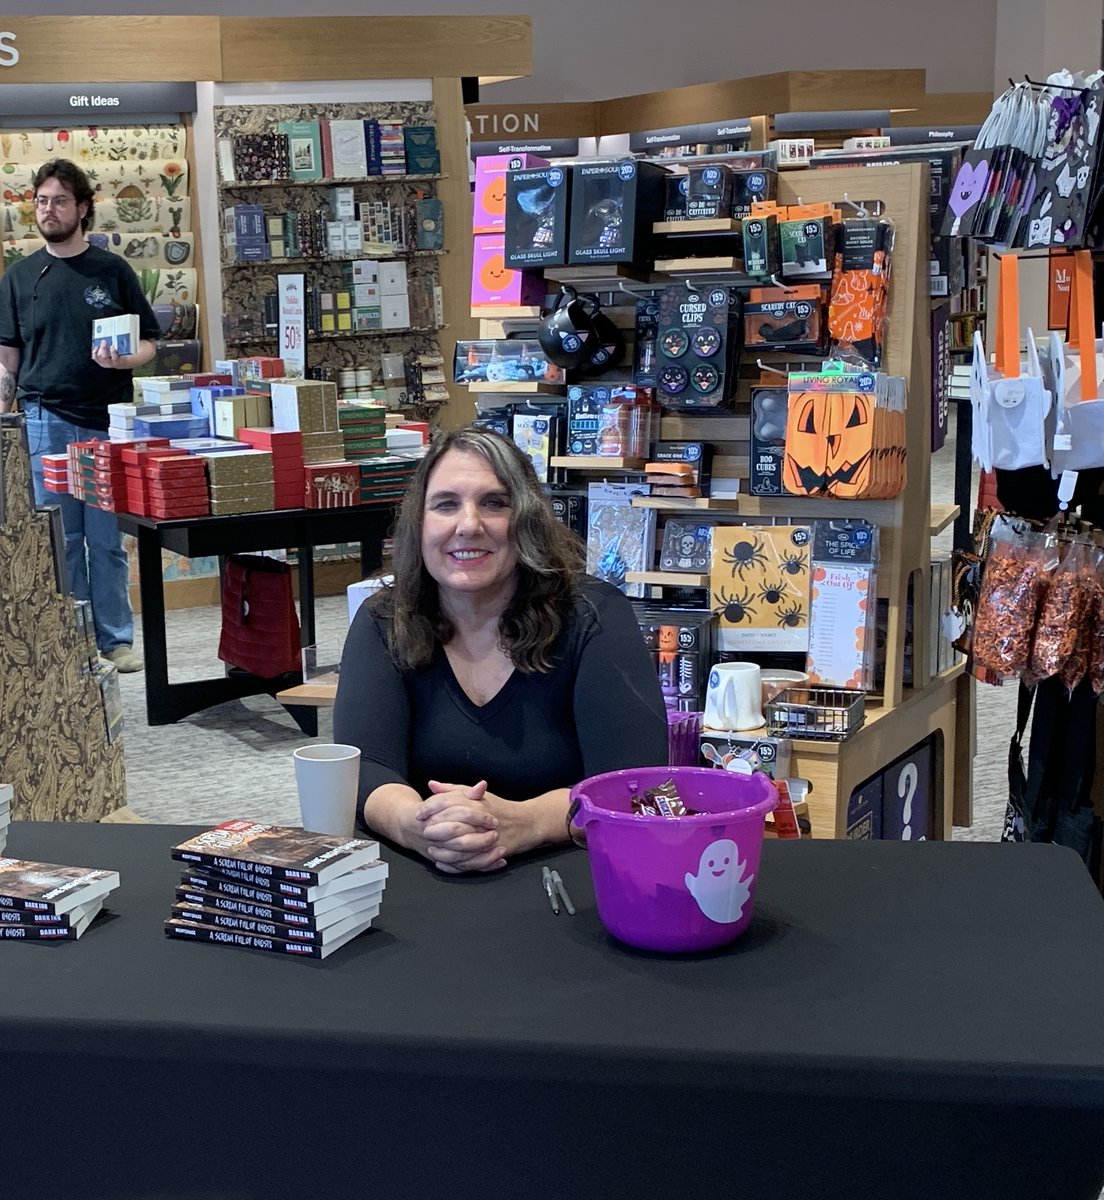 My first book signing! Sold some books (A Scream Full of Ghosts), met some cool peeps! Livin' the life of a horror author! #horrorcommunity #writingcommunity #Halloween #horrorauthor